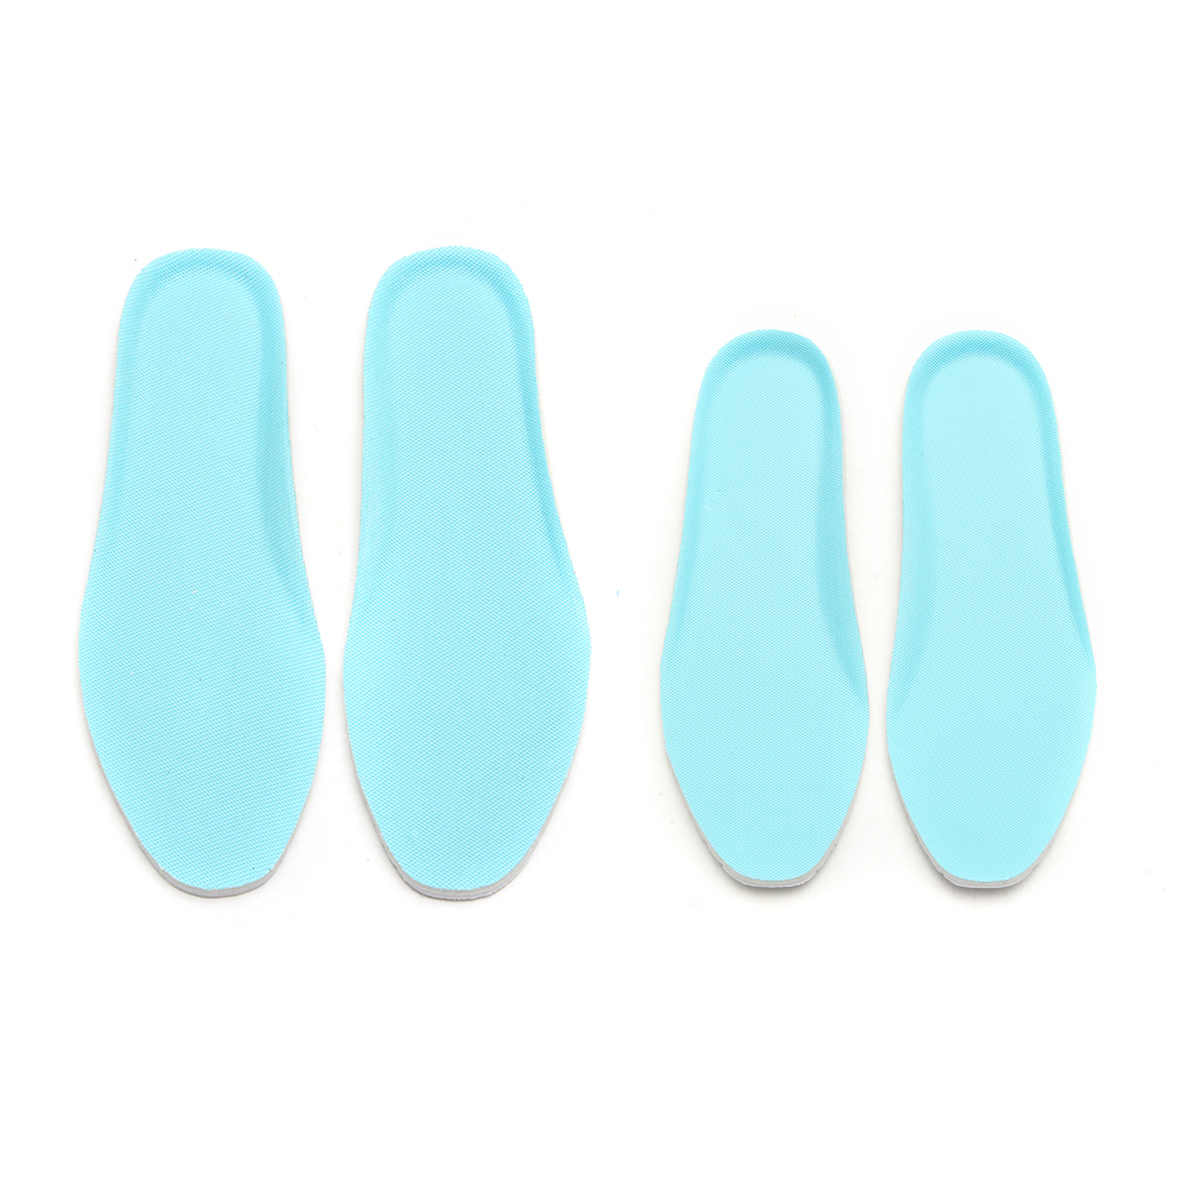 1-Pair-Damping-Orthotic-Sports-Insoles-Shoe-Pad-Heel-Cushion-For-Arch-Support-1117171